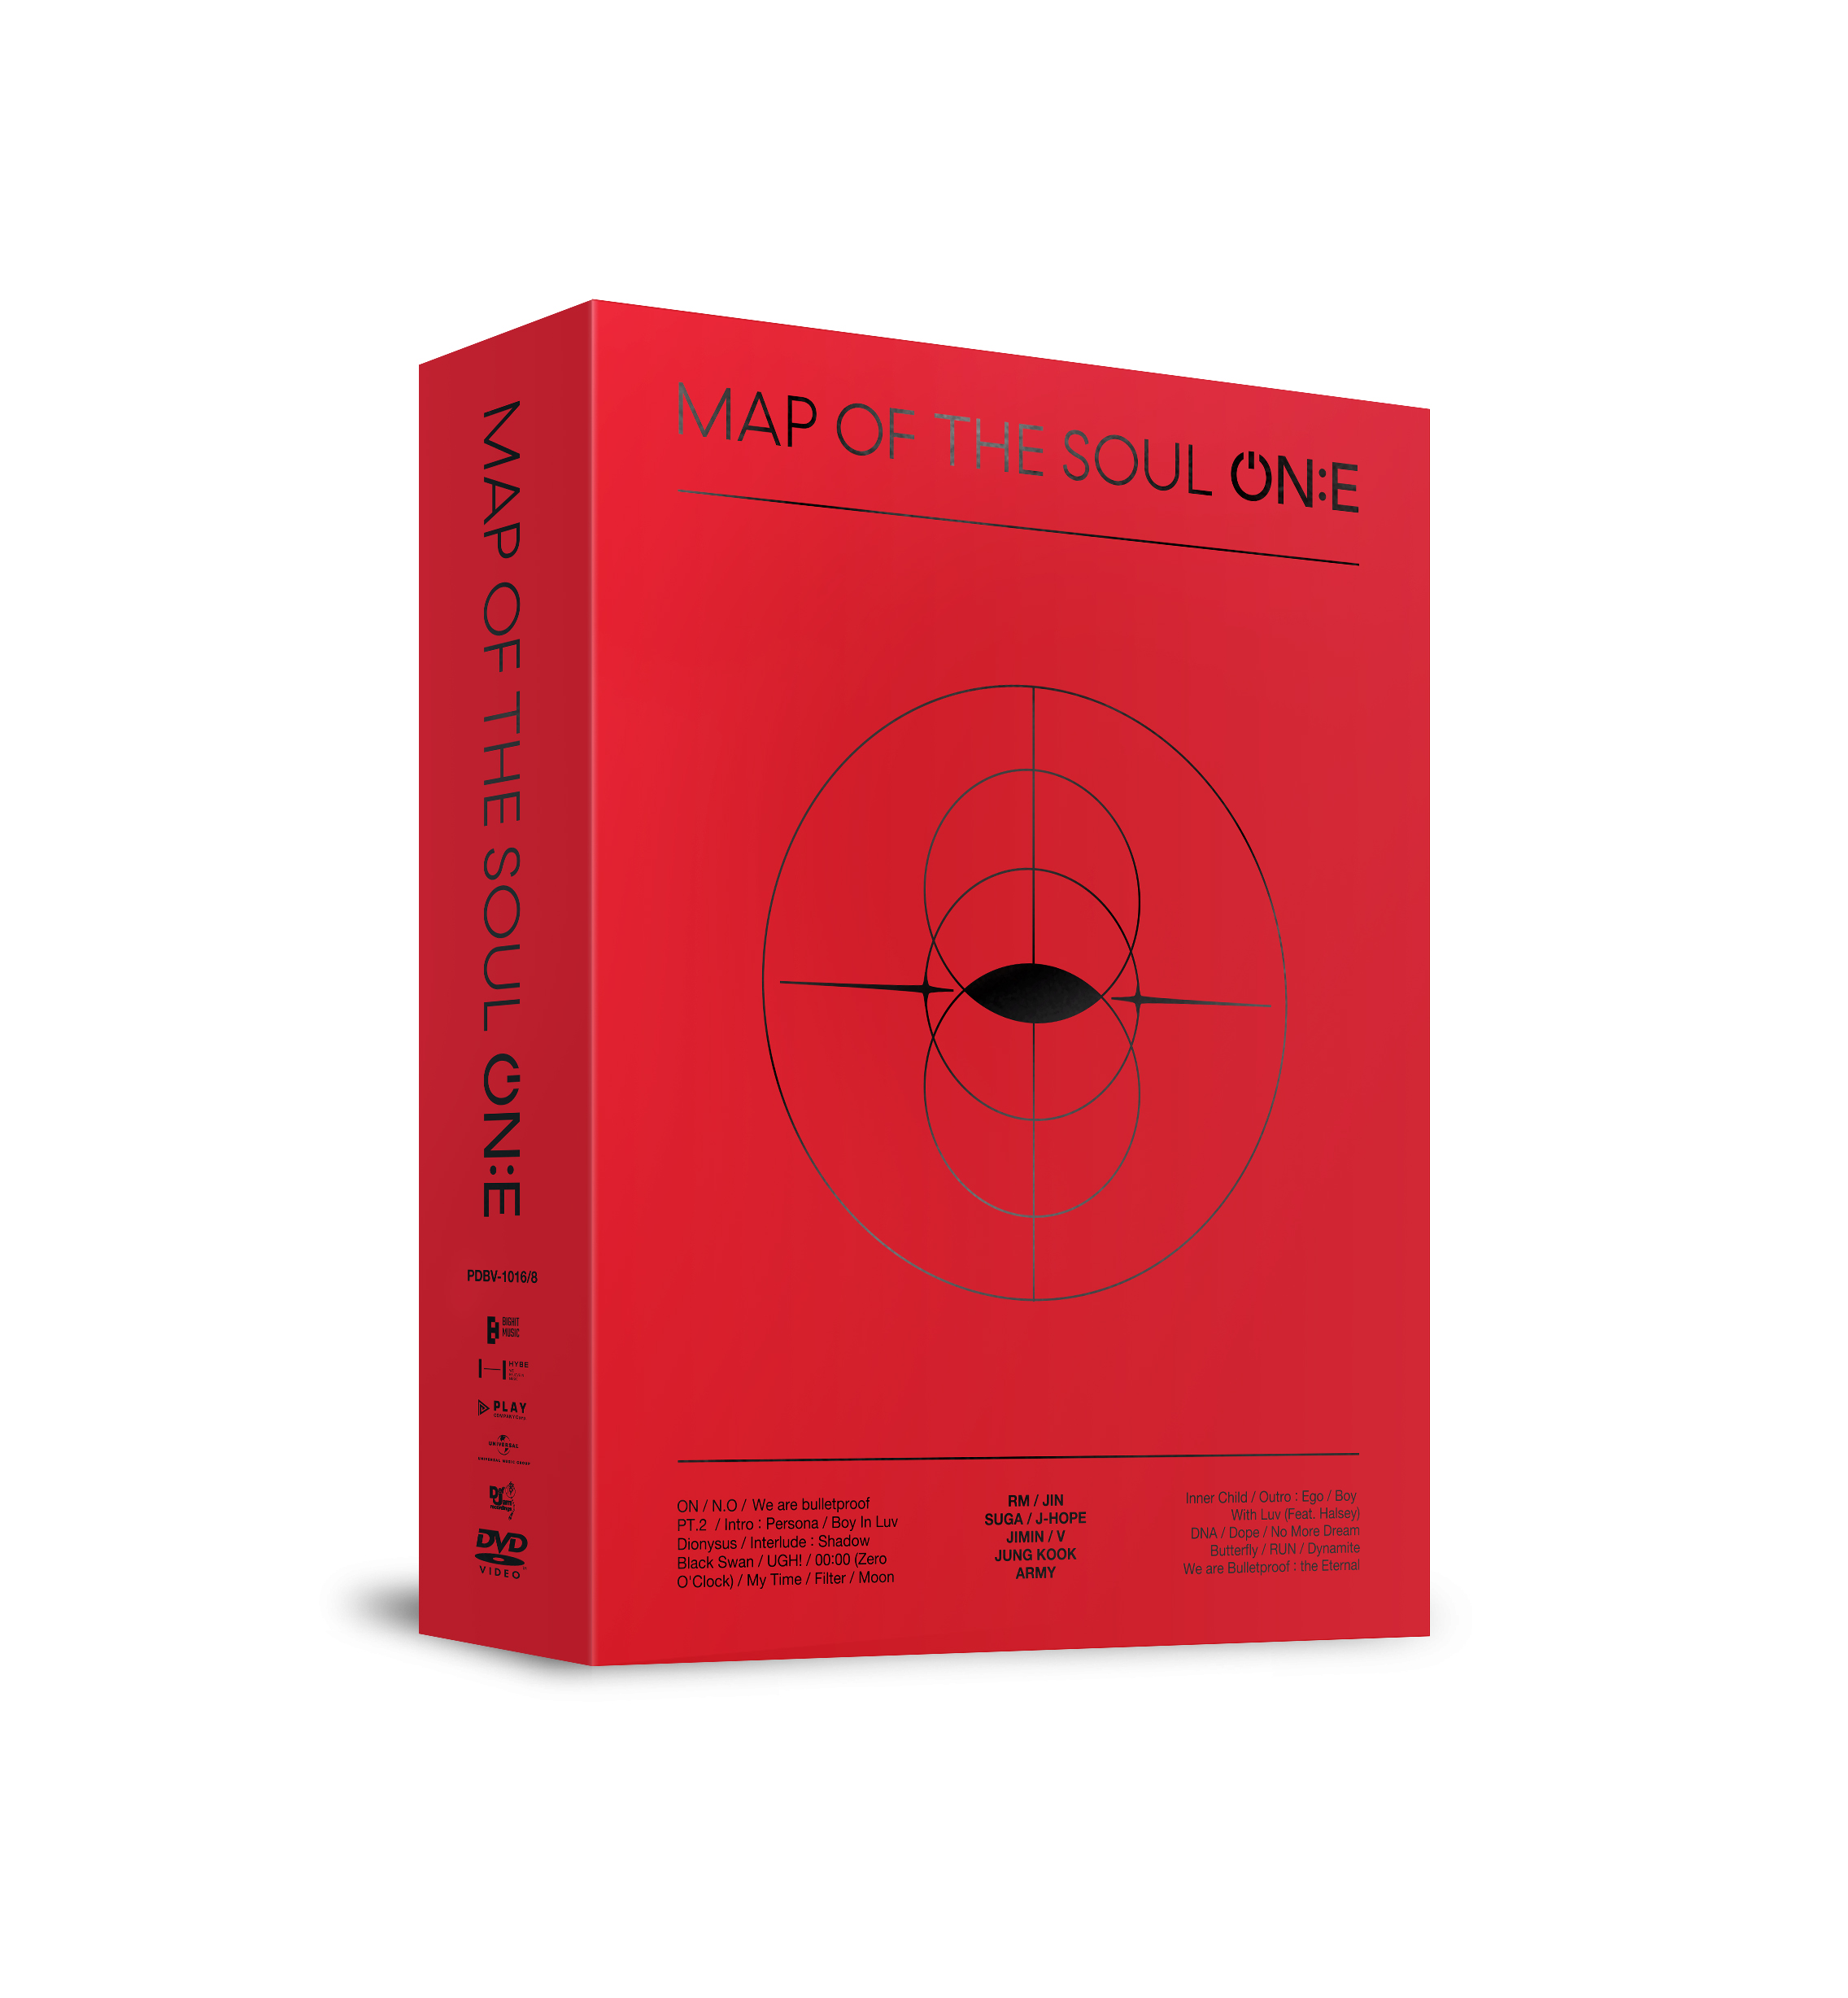 Dvd Bts Map Of The Soul On E 9月23日 木 発売決定 Bts Japan Official Shop Universal Music Storeにて8月17日 火 より予約販売スタート Bts